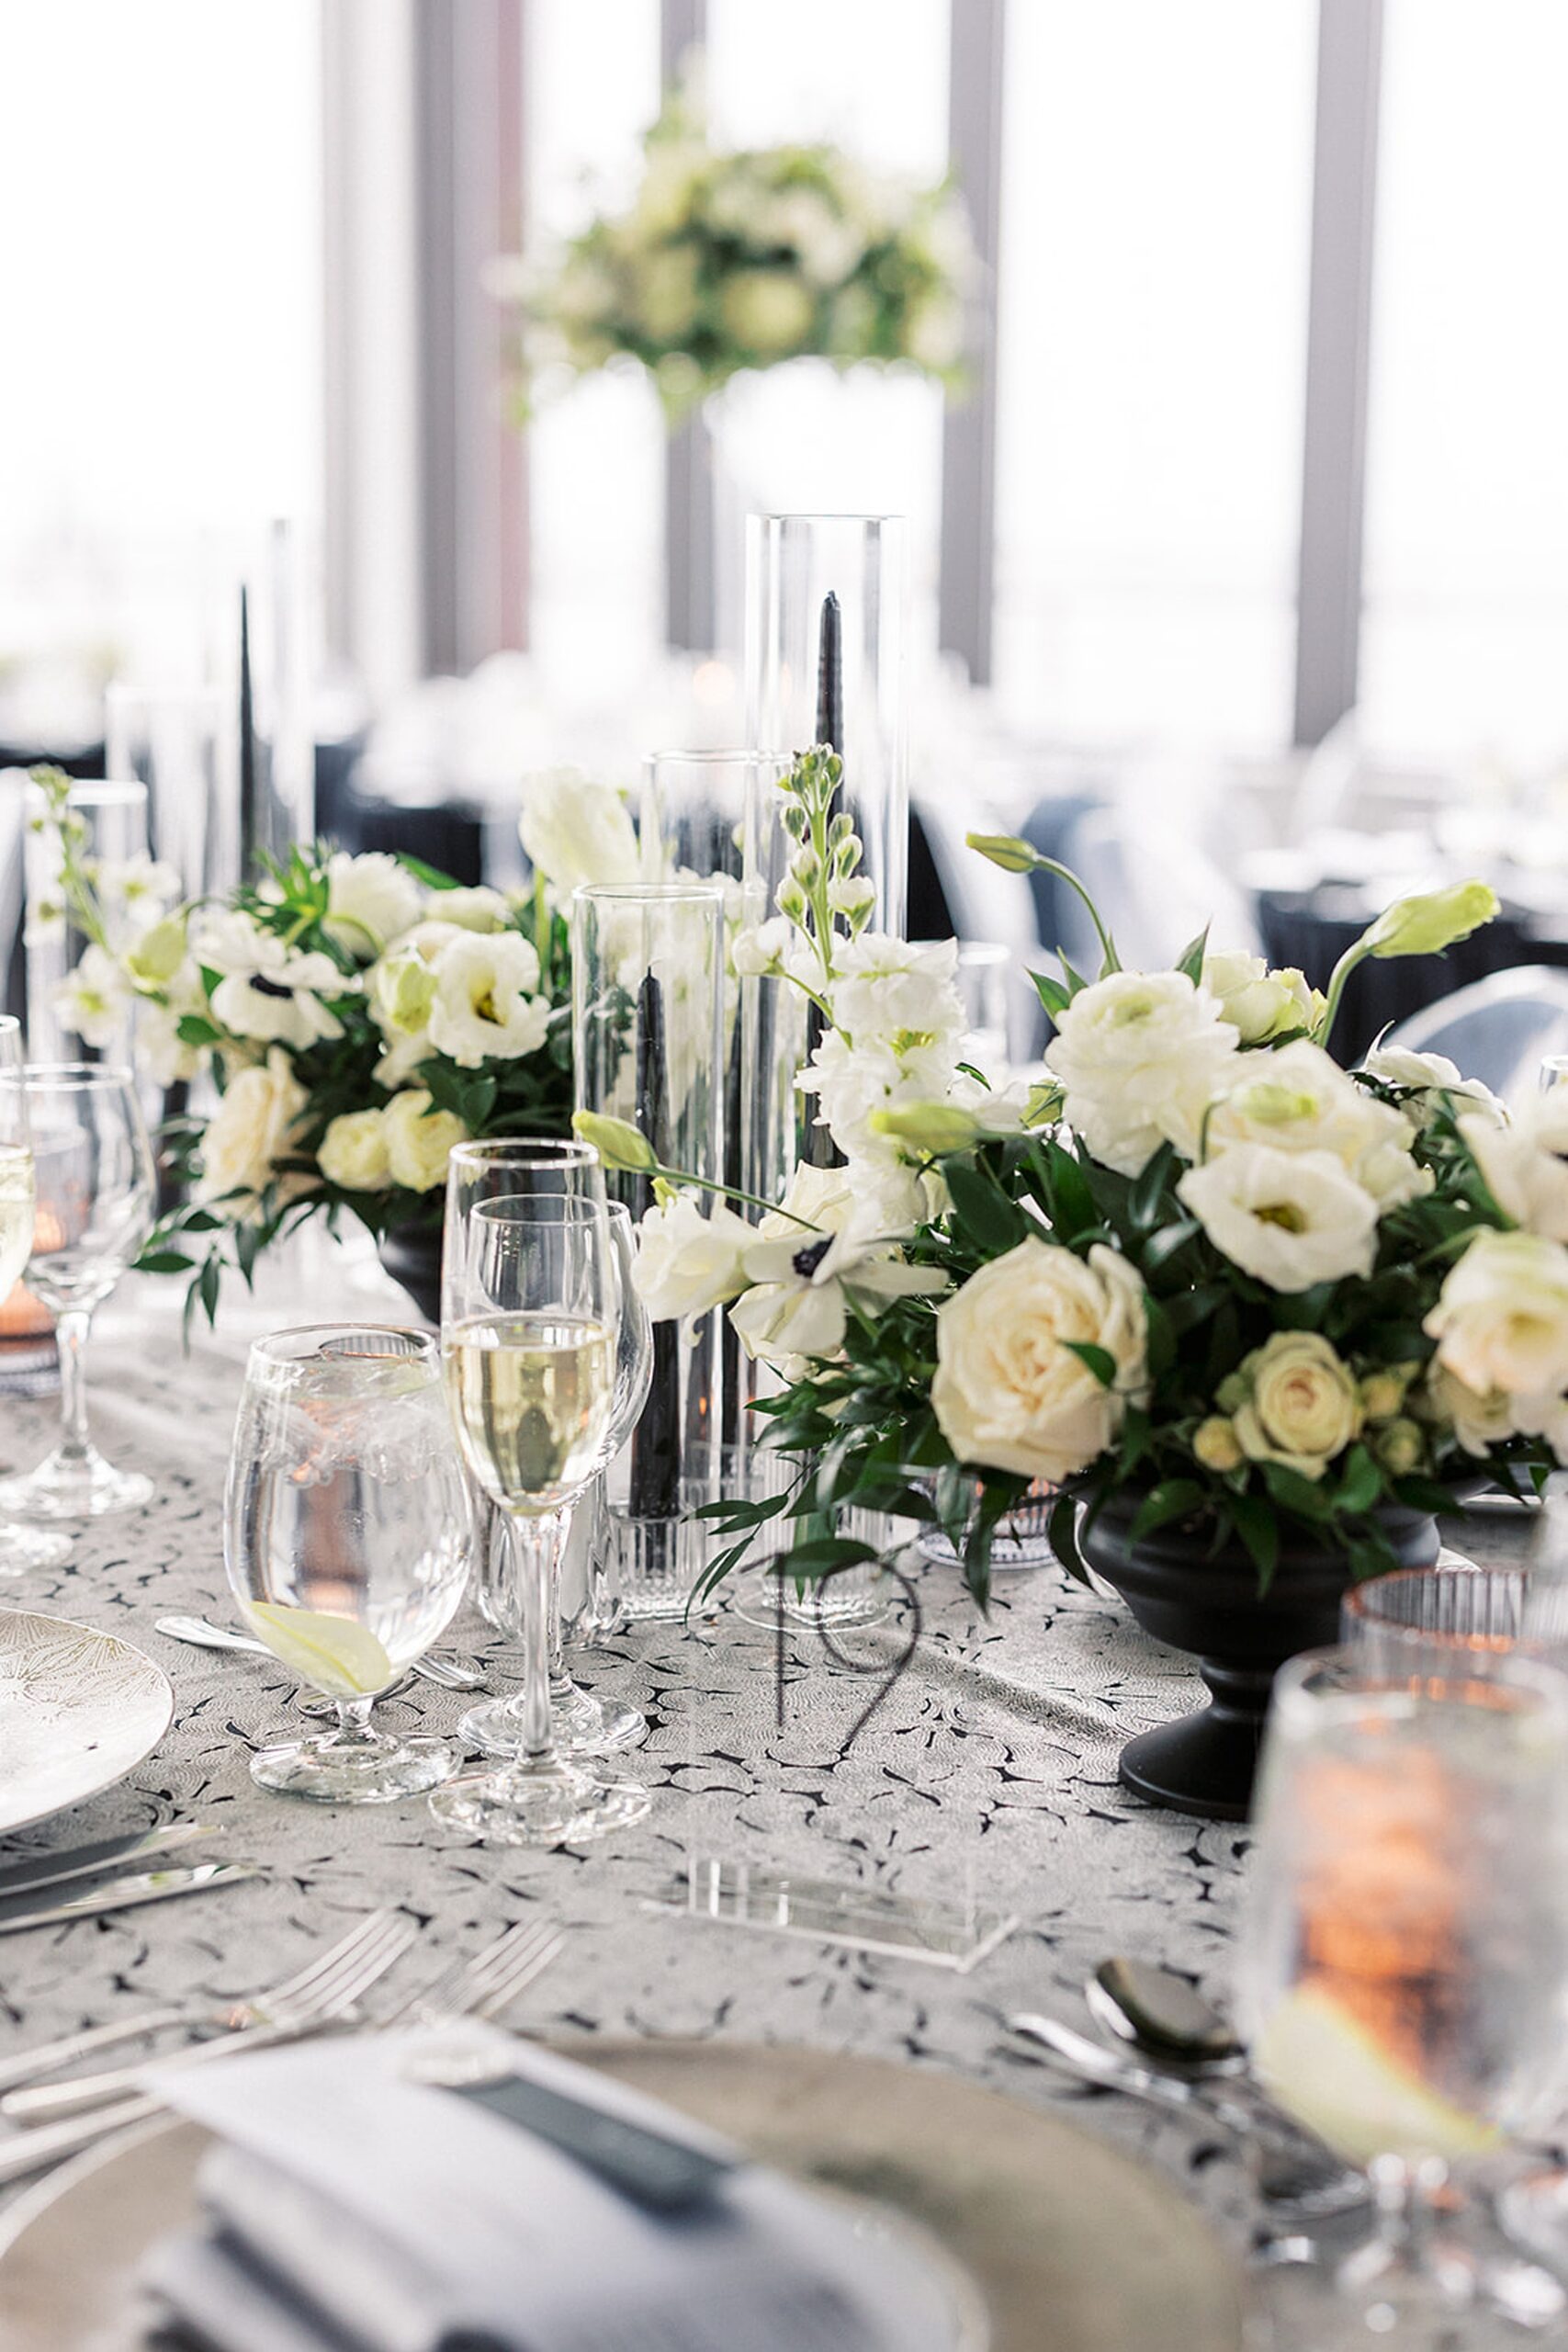 Details of a wedding reception table set with champagne and white rose centerpieces at a Hudson House wedding